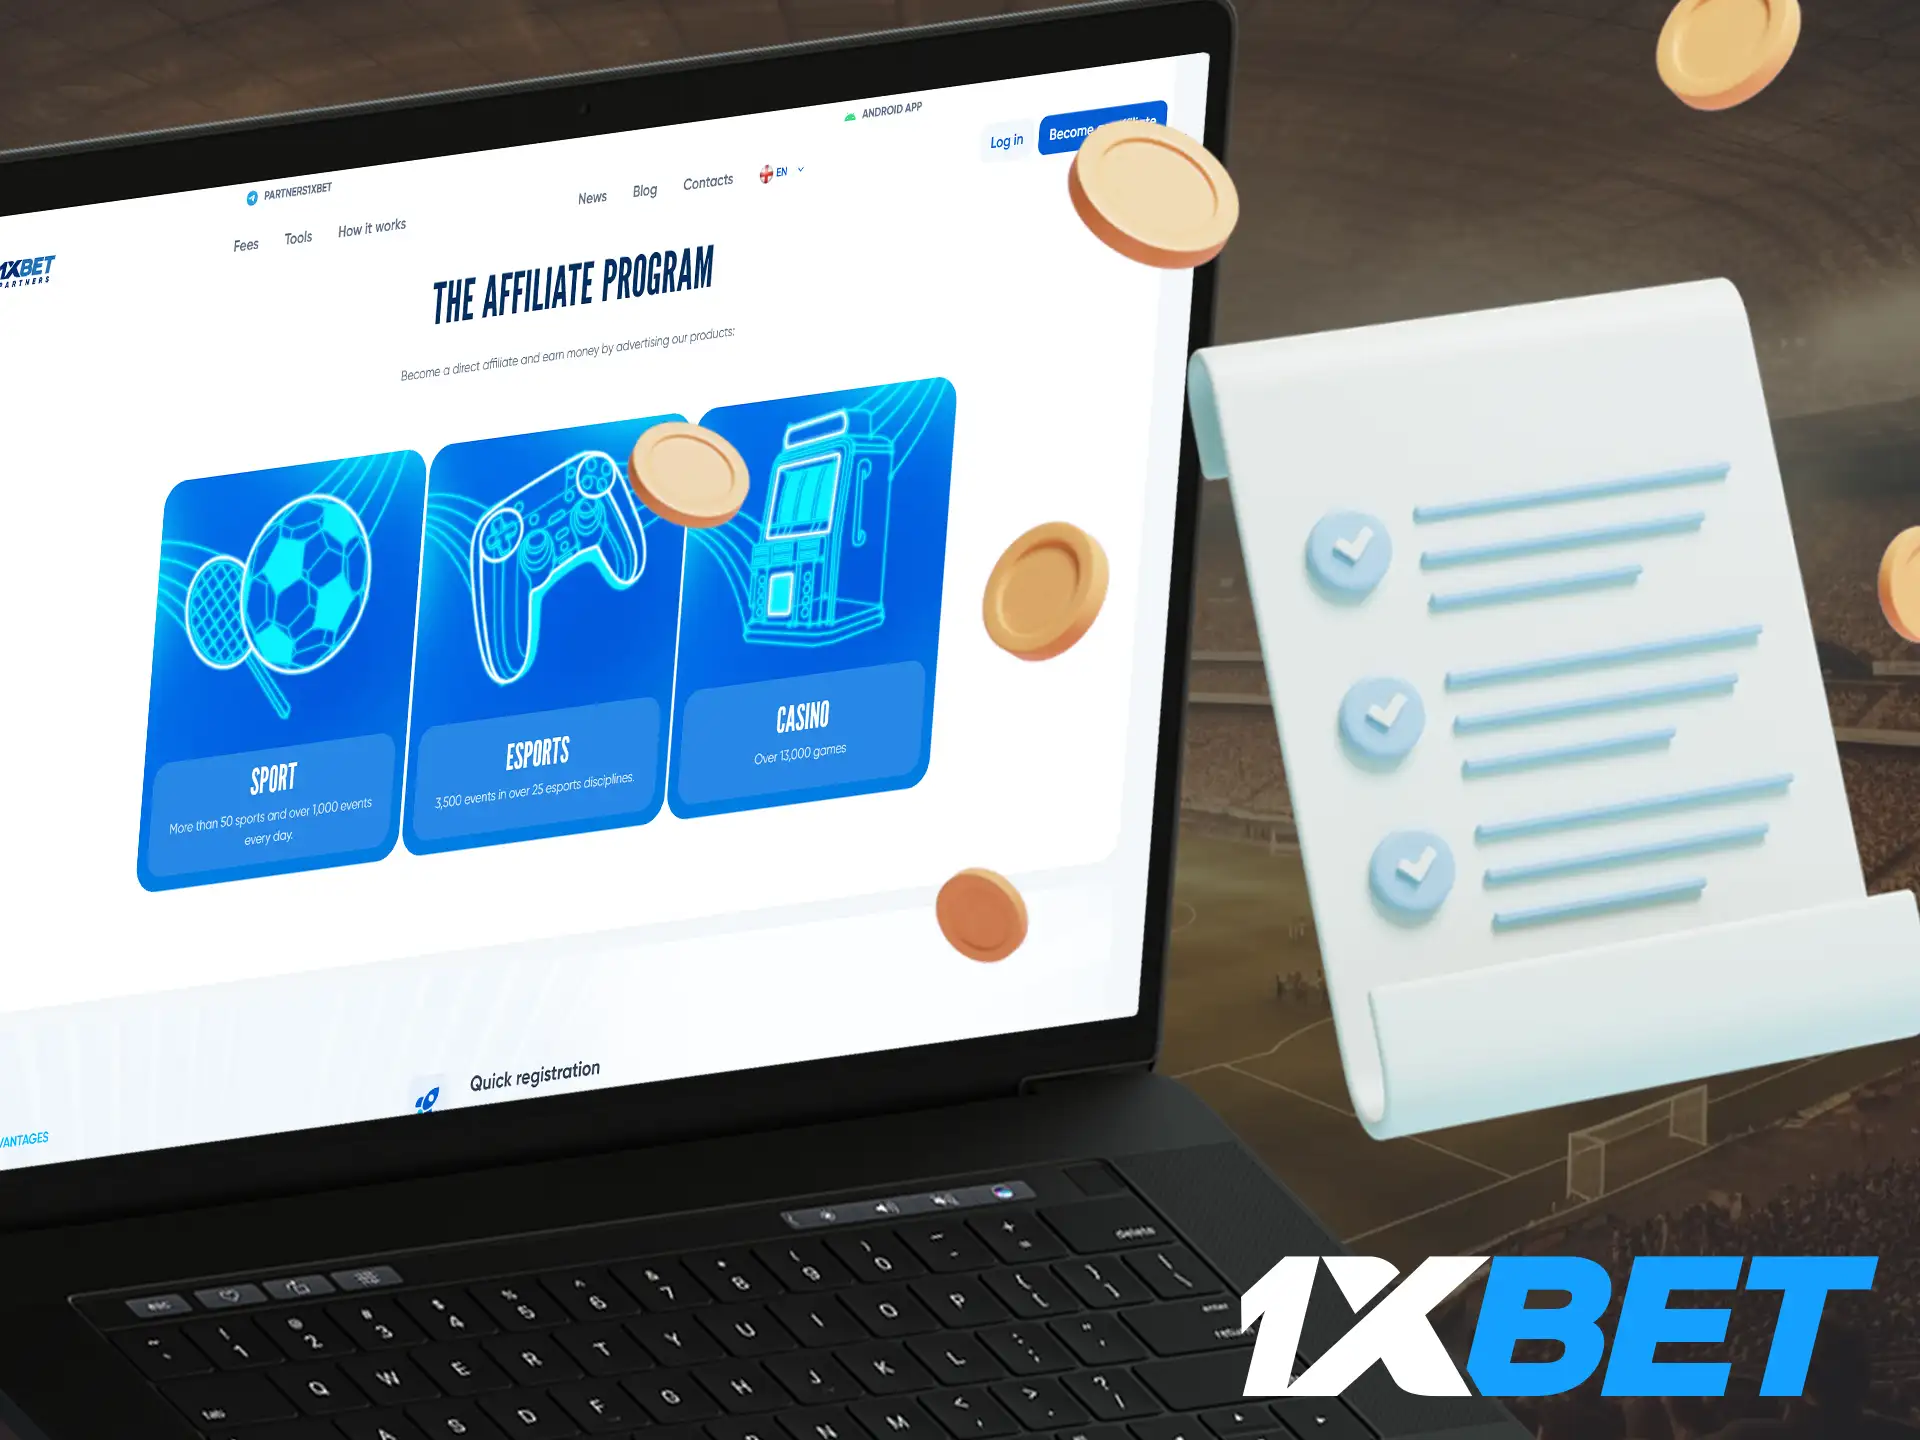 For Indian players 1xBet sport betting site offers a loyalty program where users can earn extra money by participating.